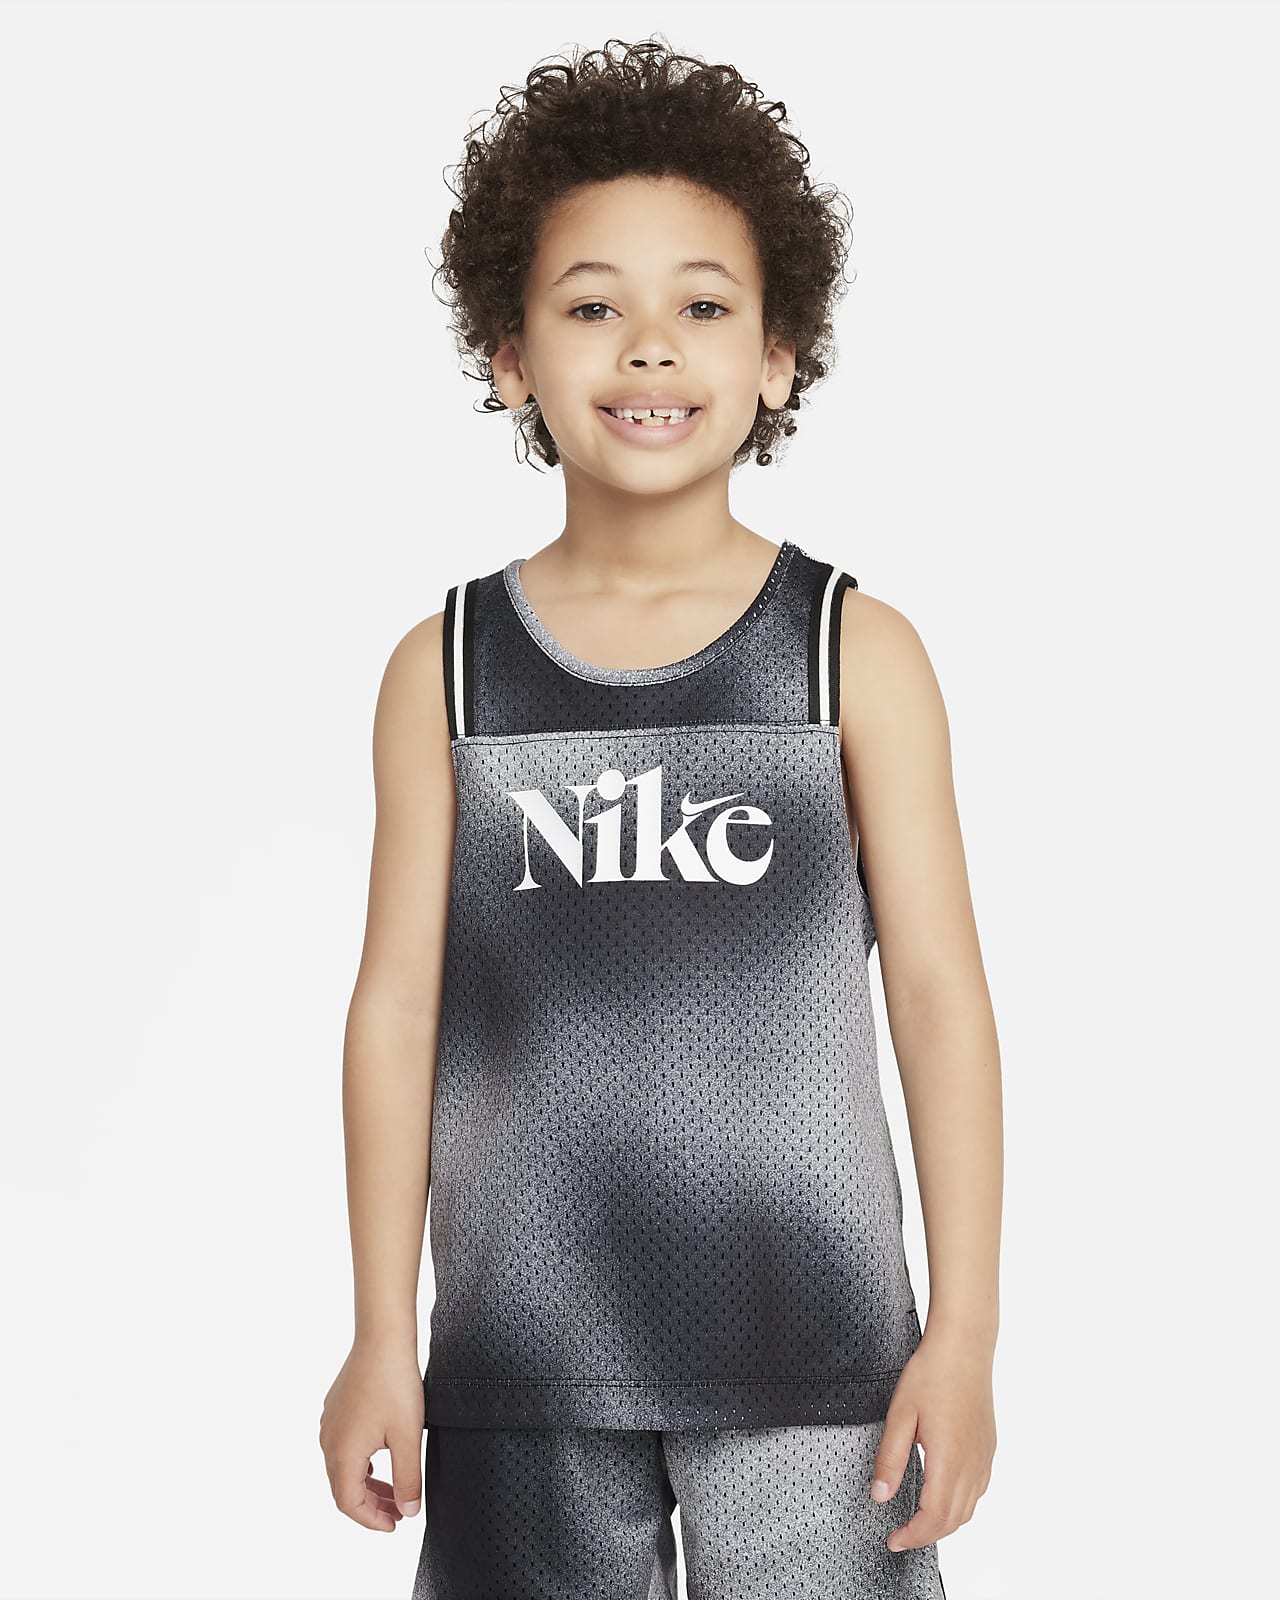 Nike Culture of Basketball Printed Pinnie Little Kids Top